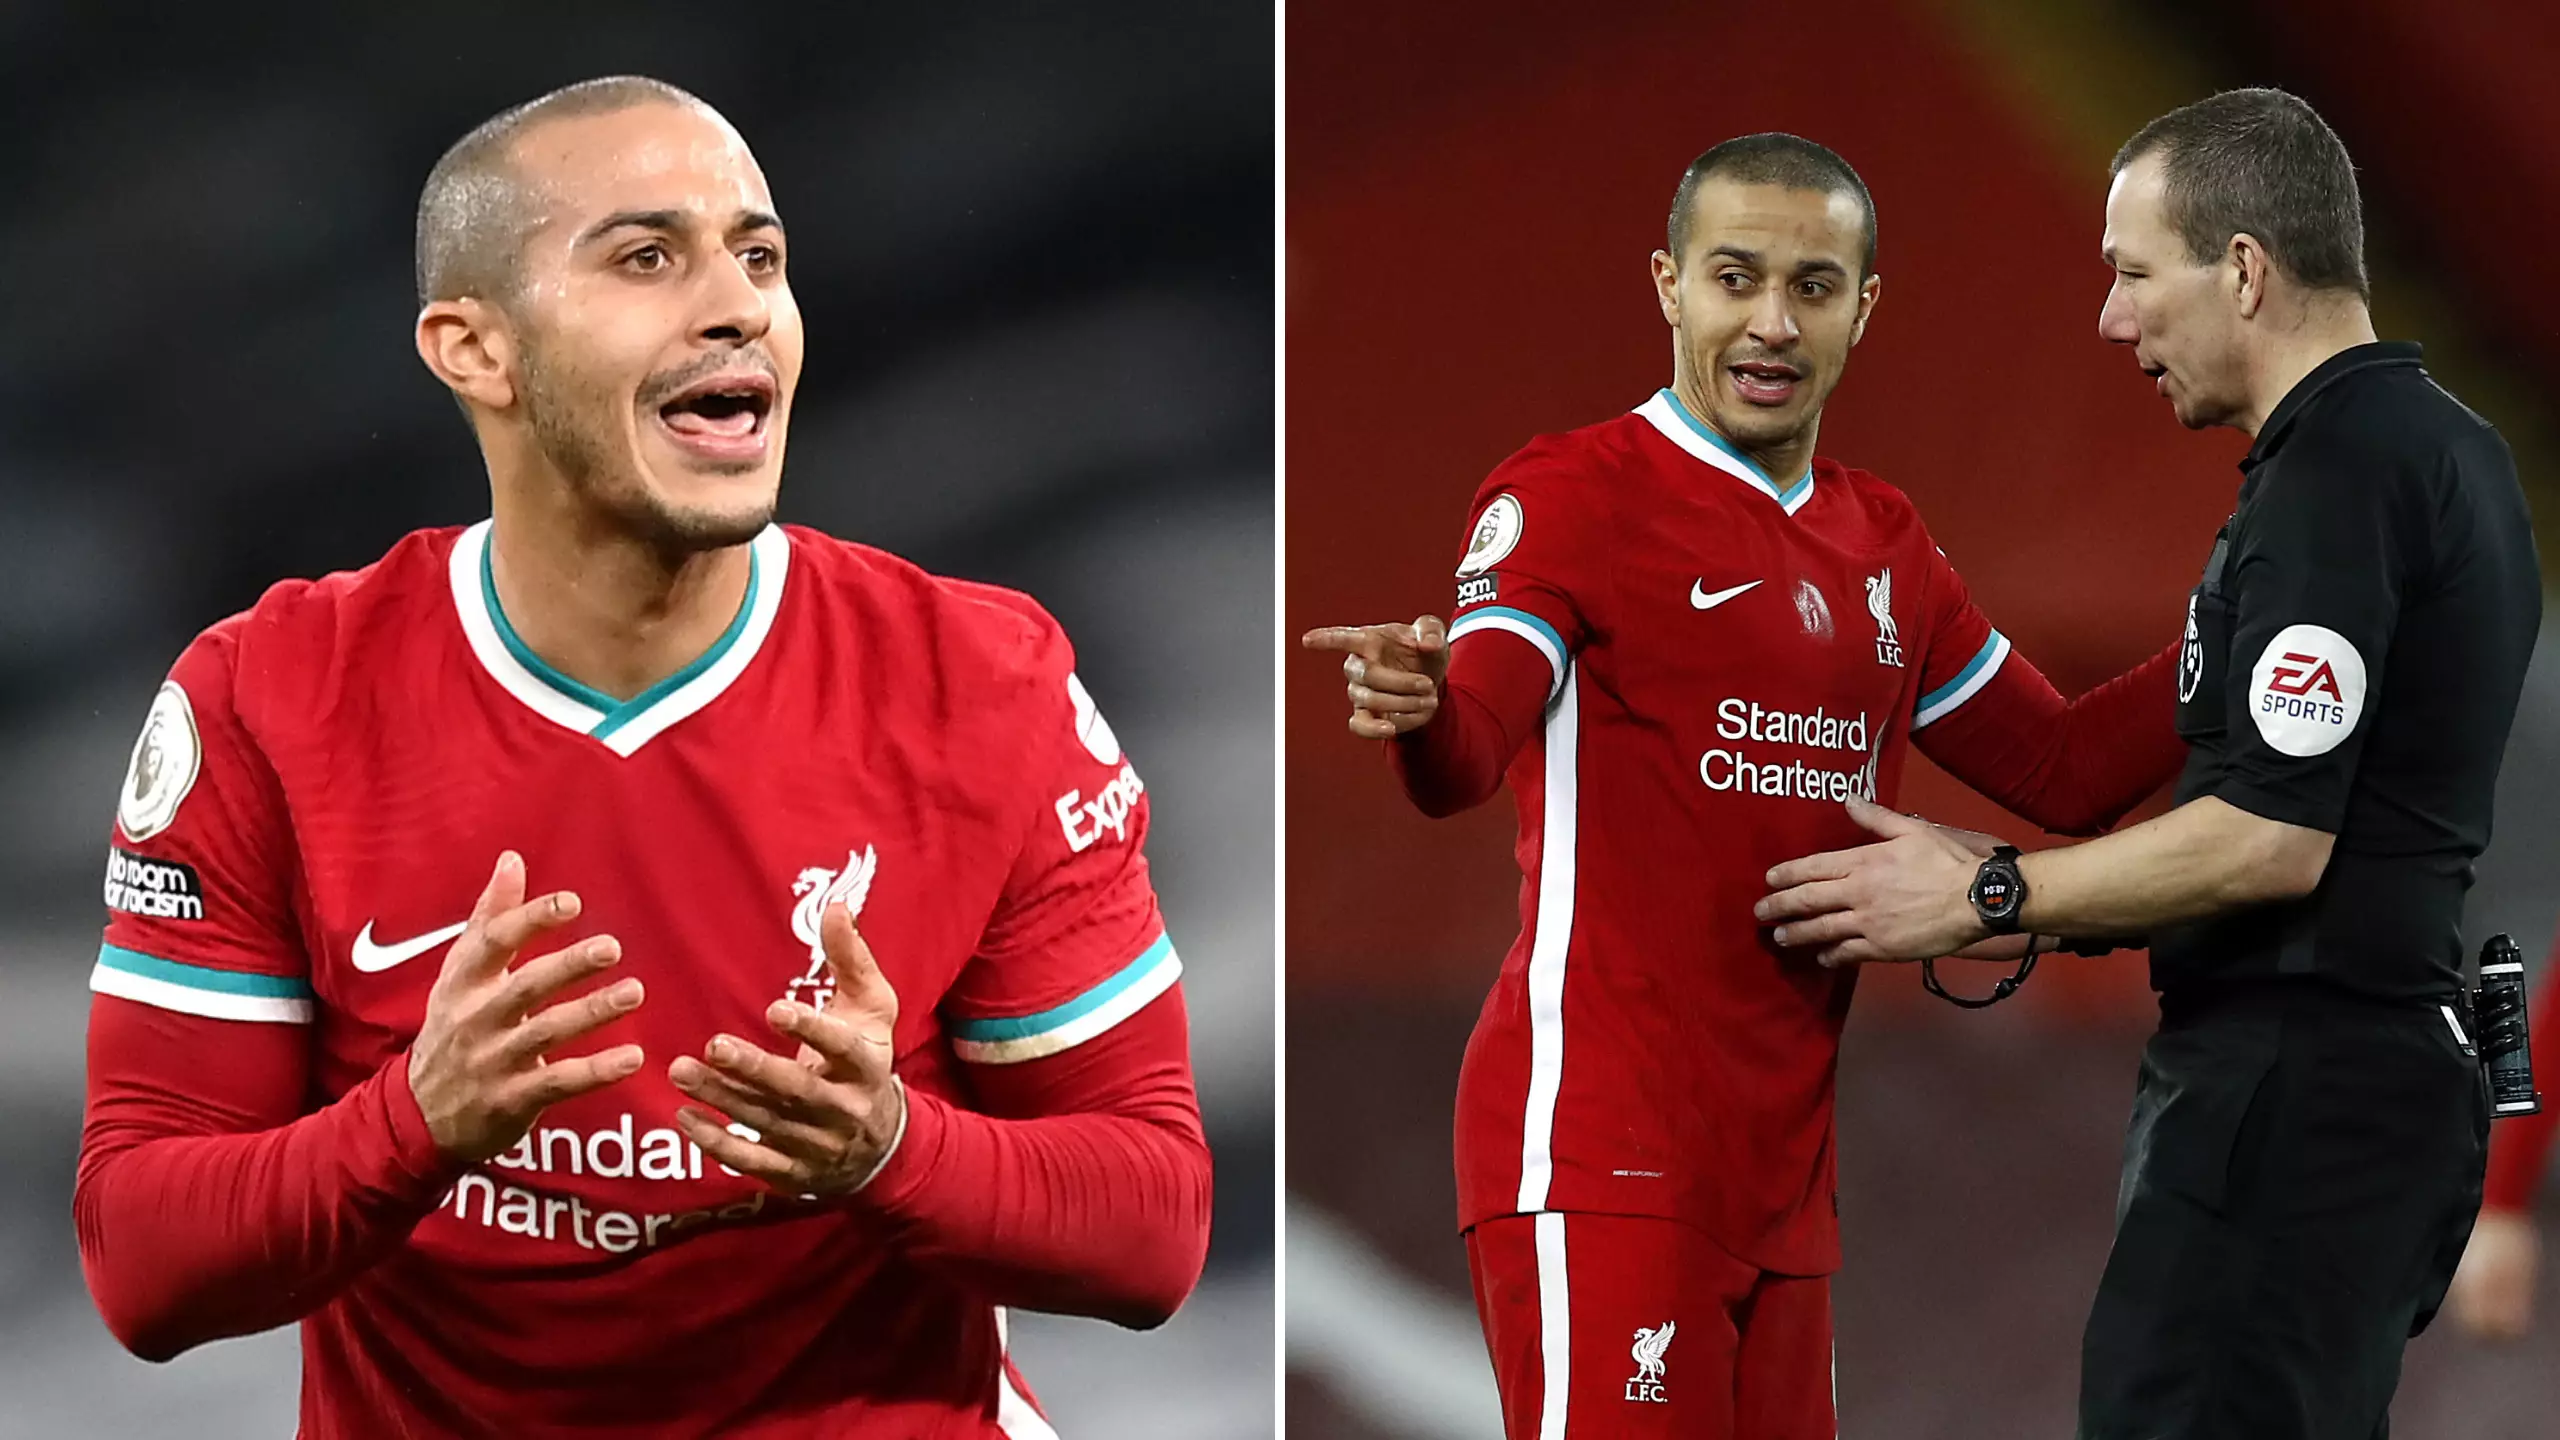 Thiago Brutally Mocked By Rival Fans Yet Again After Liverpool's Shock 1-0 Loss To Brighton